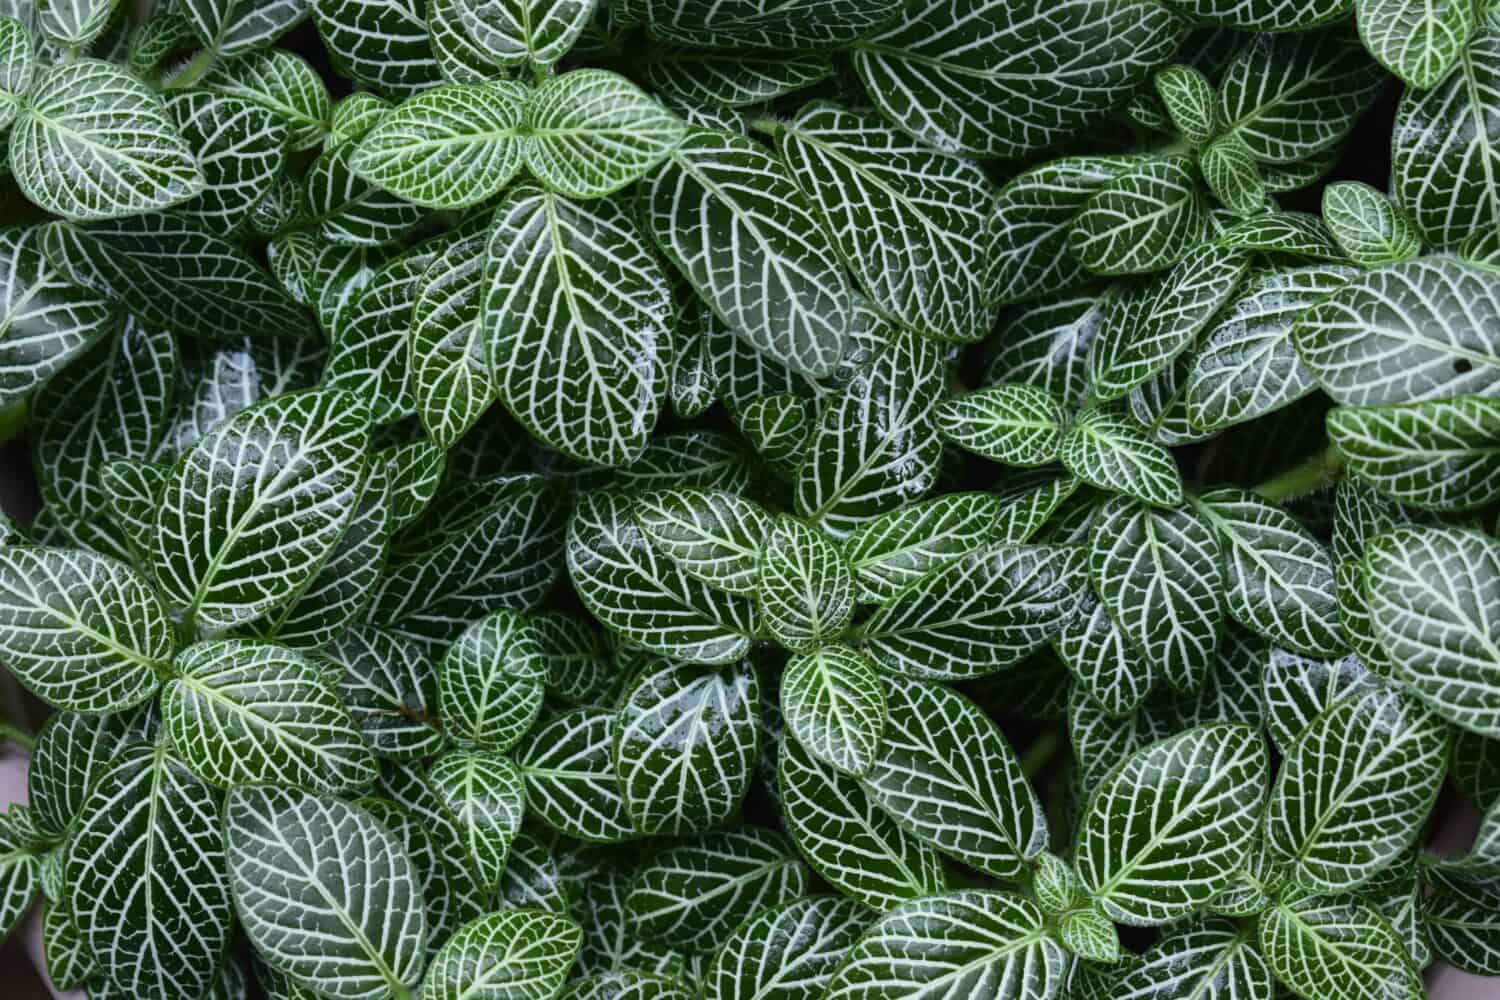 This is Nerve plant (Fittonia albivenis) one of flowering plant in the family Acanthaceae.